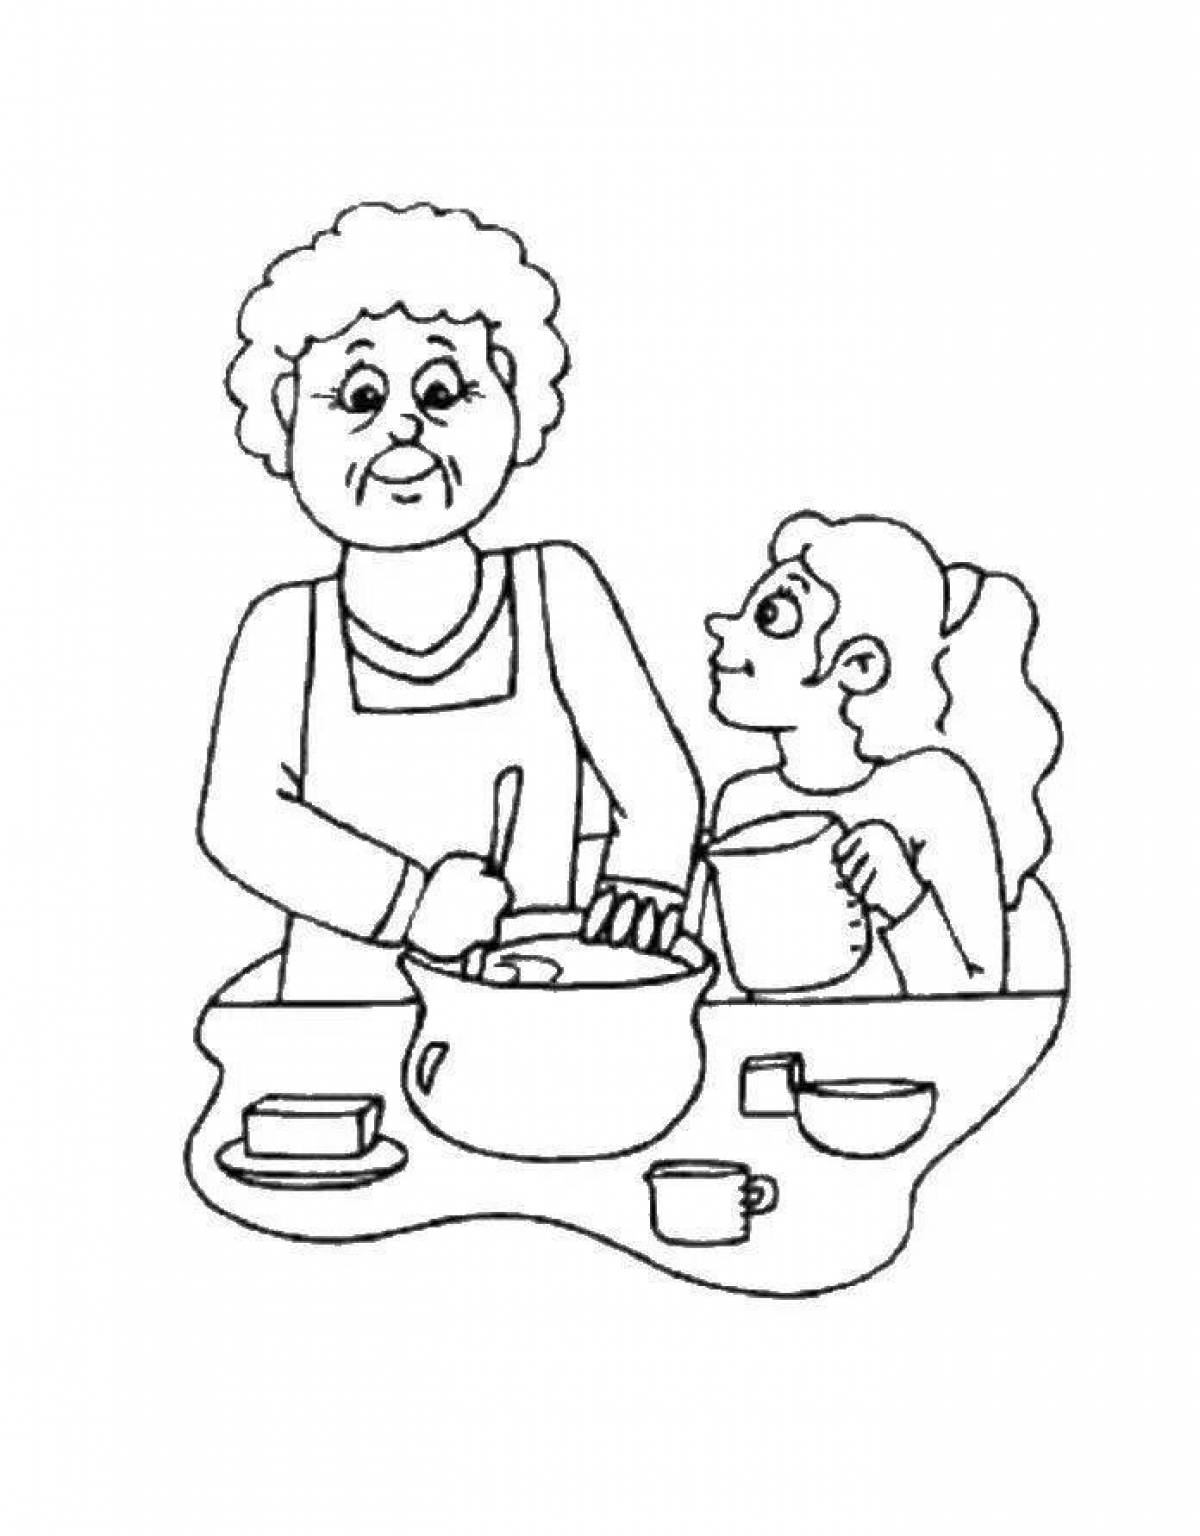 Soulful grandmother and granddaughter coloring